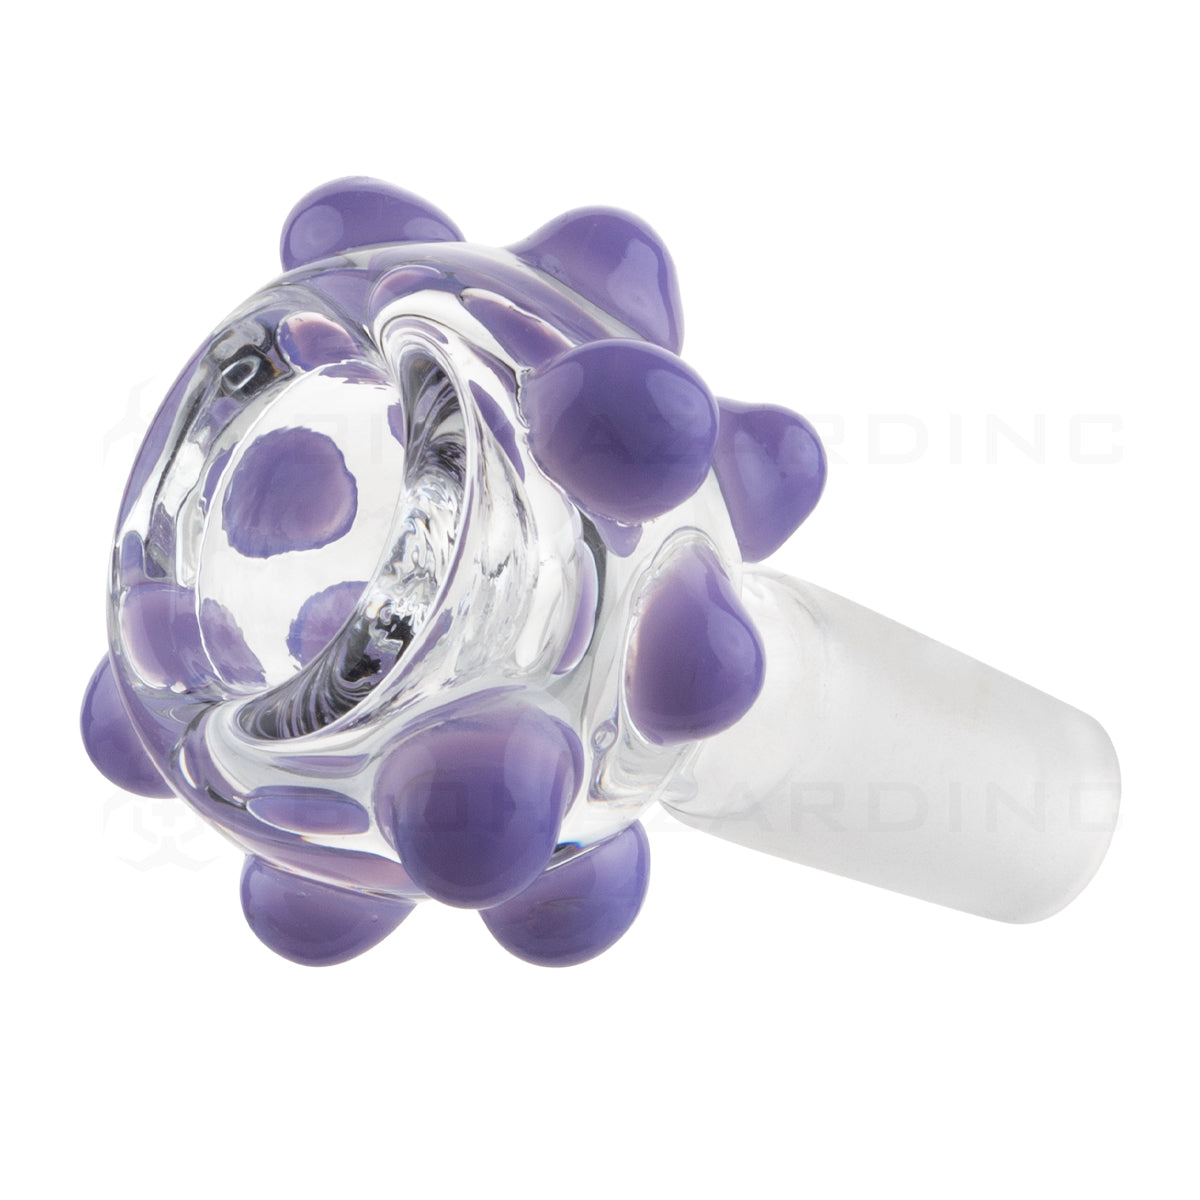 Bowl | Slyme Marbles Glass Bowls | 14mm - Glass - 4 Count Glass Bowl Biohazard Inc   